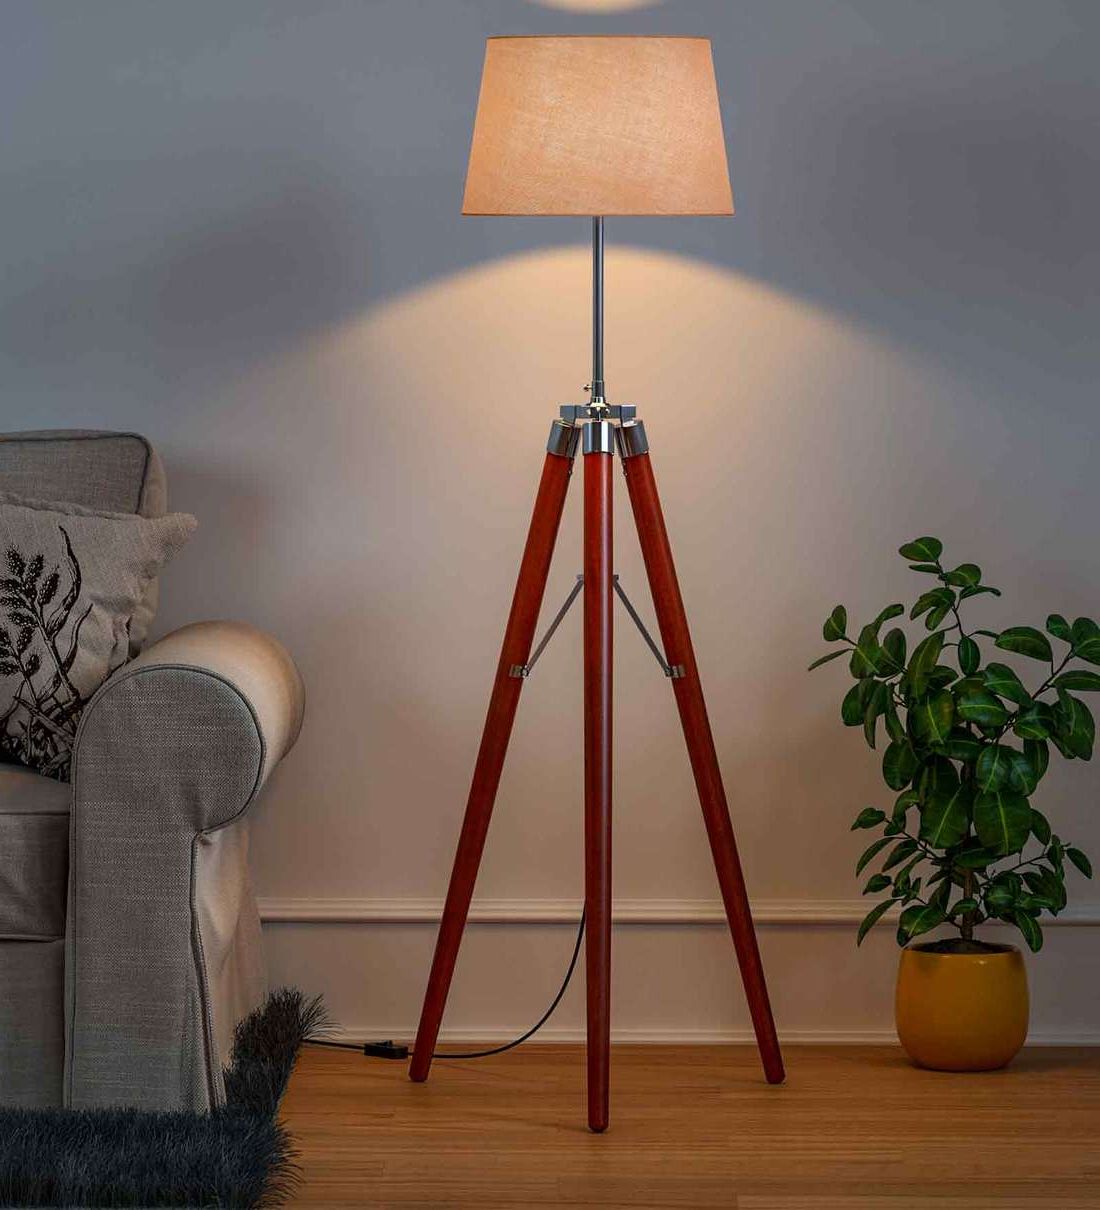 Buy Wooden Natural Brown Stick Tripod Floor Lamp Standing With Lamp Shade Kp Lamps Store Online – Tripod Floor Lamps – Floor Lamps – Lamps And  Lighting – Pepperfry Product With 2019 Tripod Standing Lamps (View 4 of 15)